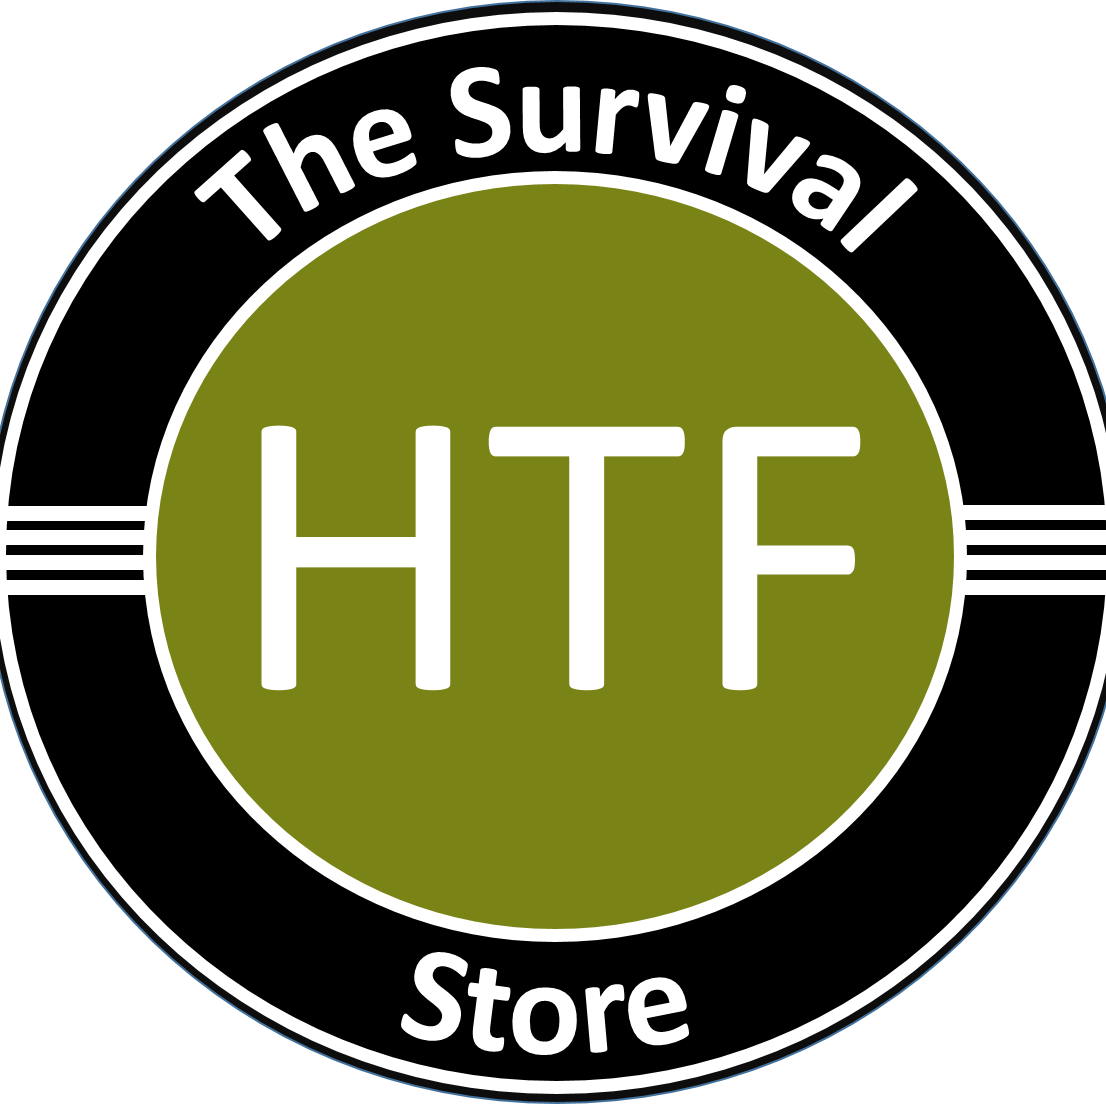 Survival/prepardness/homesteading products store located in Anderson SC. Helping you be prepared...just in case.